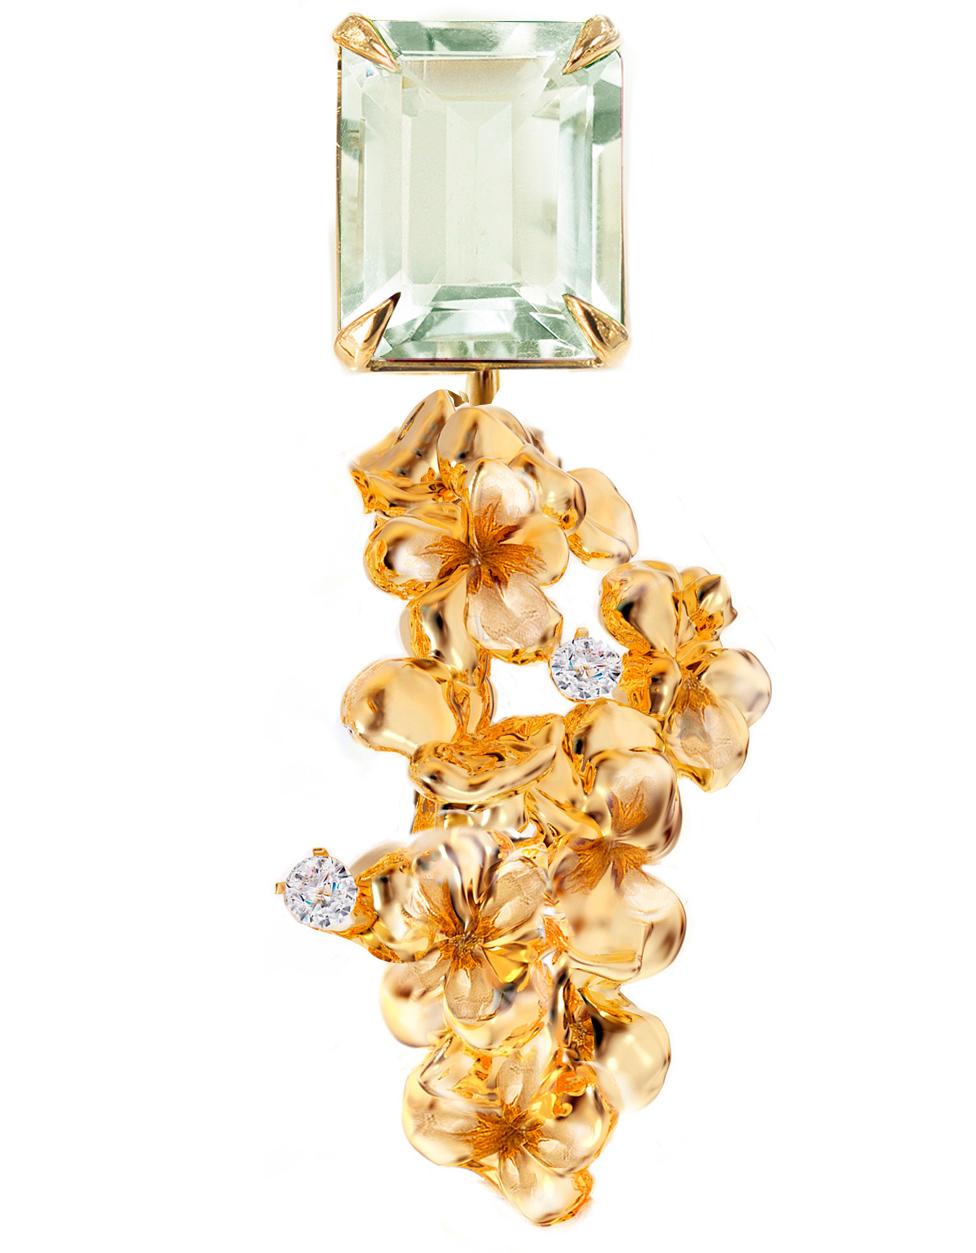 These contemporary 18 karat yellow gold Hortensia Floral cocktail stud earrings are encrusted with round diamonds and detachable prasiolites. This jewellery collection was featured in Vogue UA review in November.
One earring is around 4 cm long. We